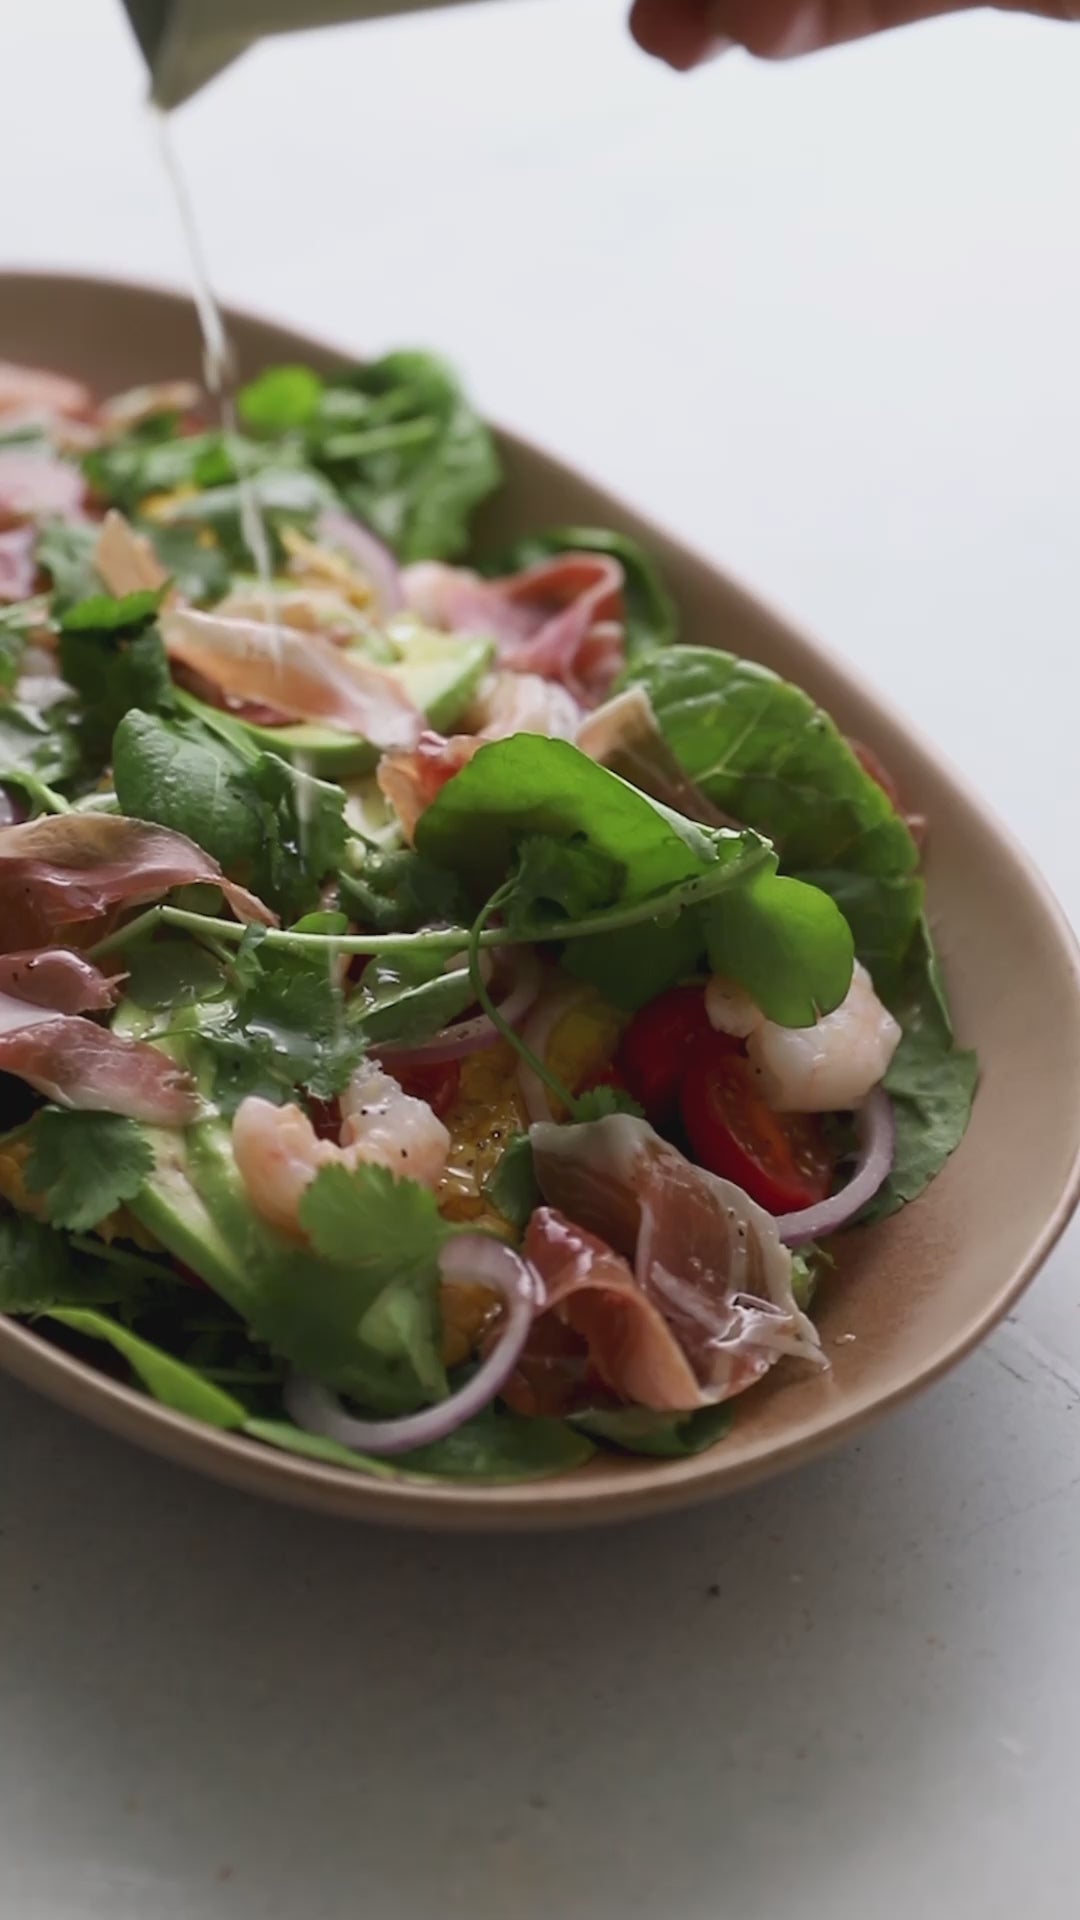 Pickled Prawn, Sweetcorn, Avocado and Prosciutto Salad with Summer Greens